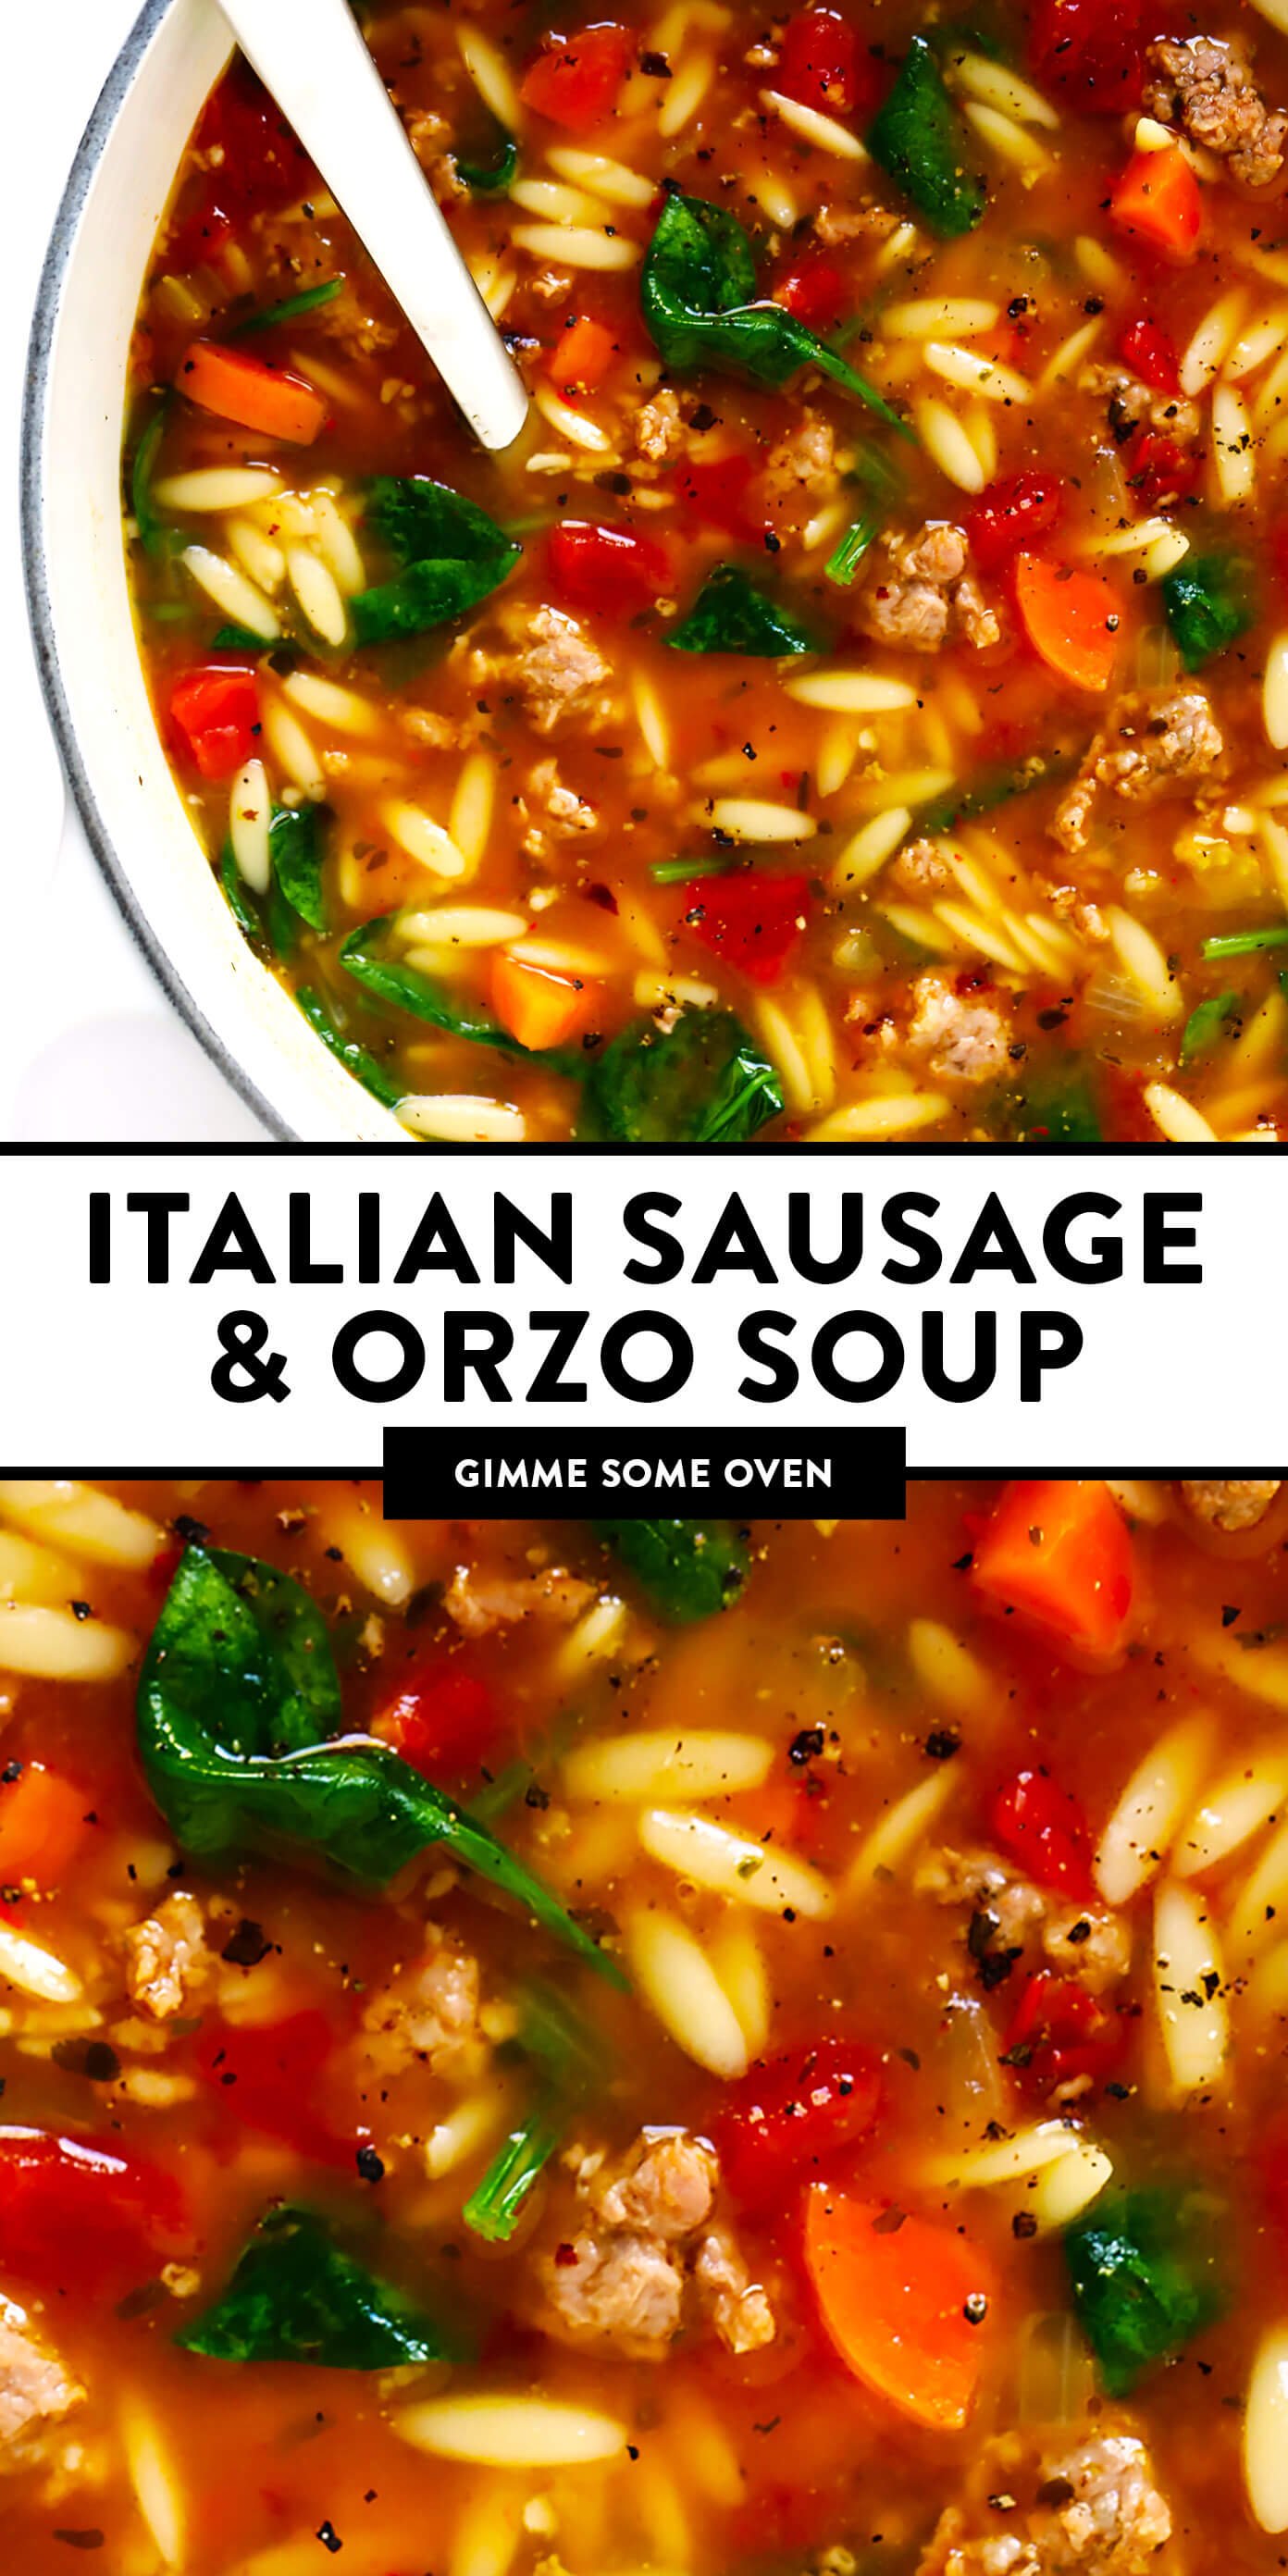 Italian Sausage and Orzo Soup - Gimme Some Oven